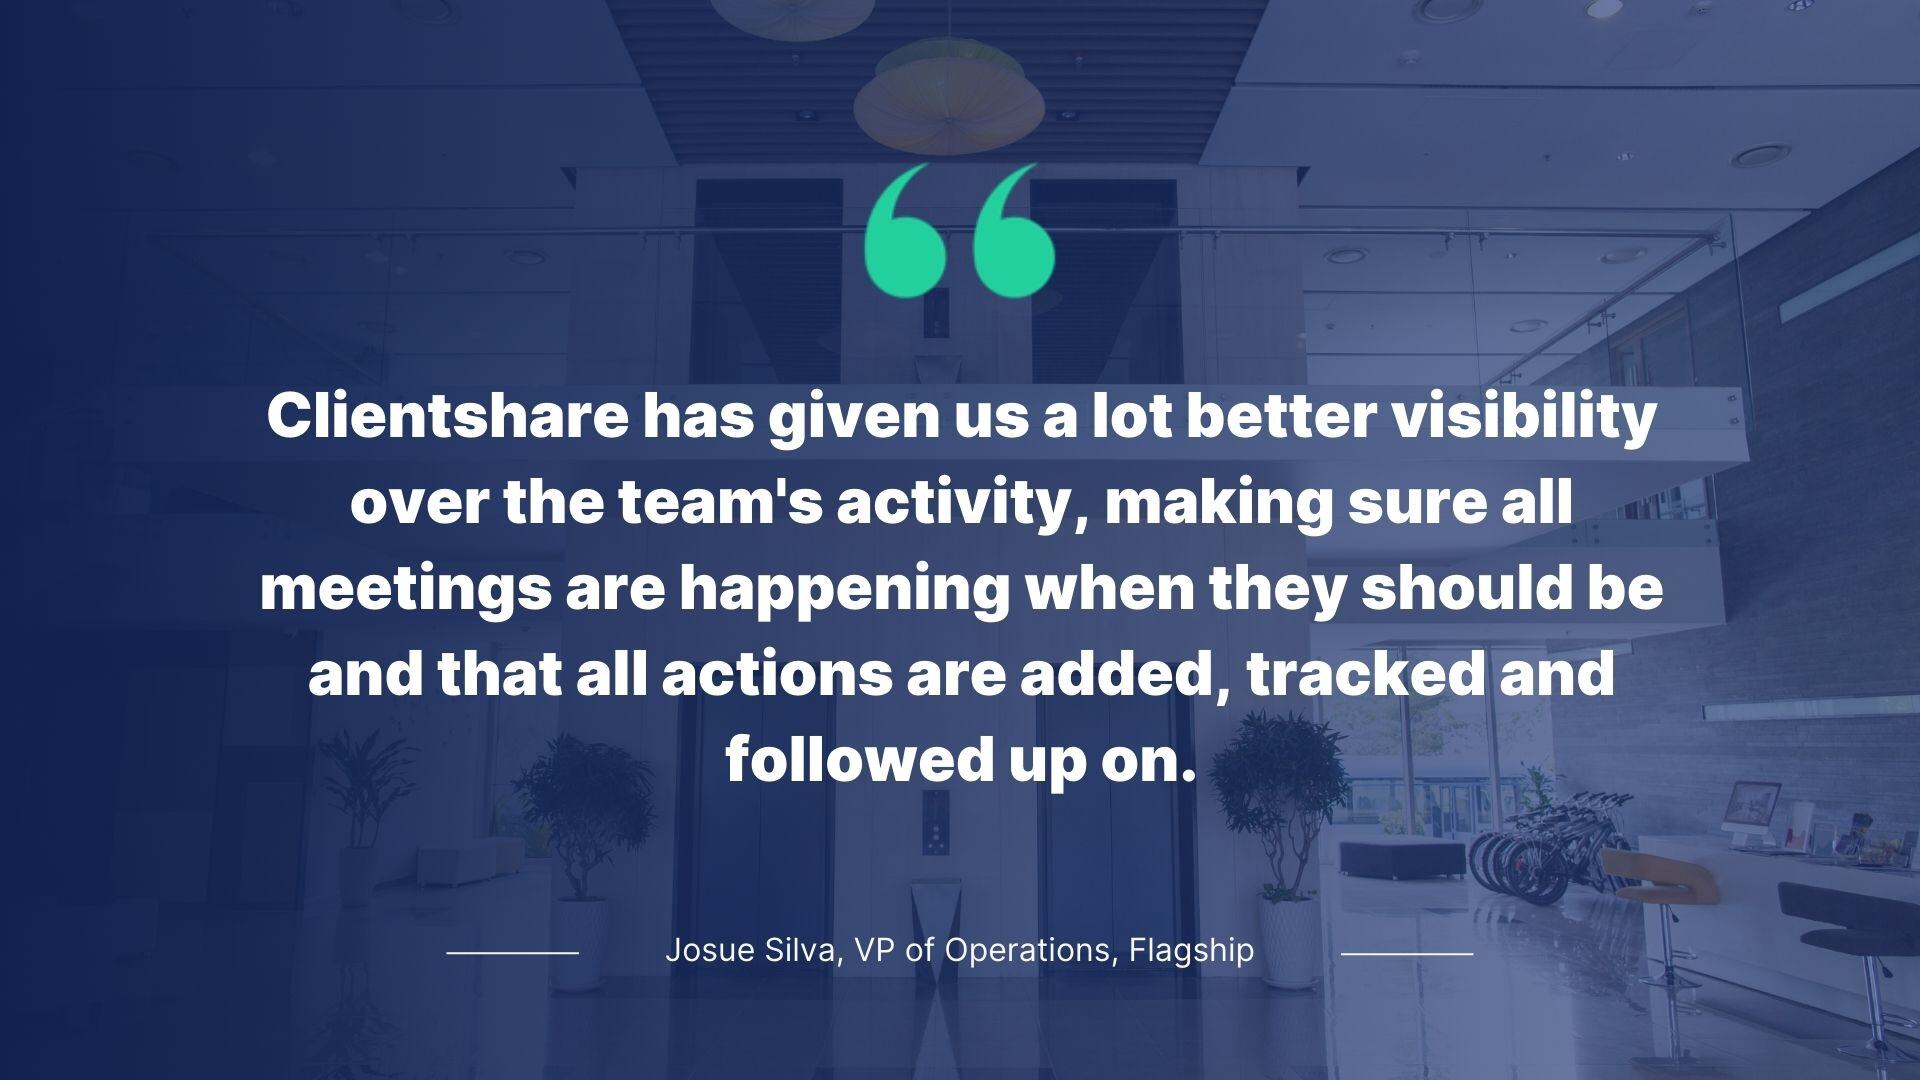 Quote from Josue Silva, VP of Operations, Flagship: Clientshare has given us a lot better visibility over the team's activity, making sure all meetings are happening when they should be and that all actions are added, tracked and followed up on.